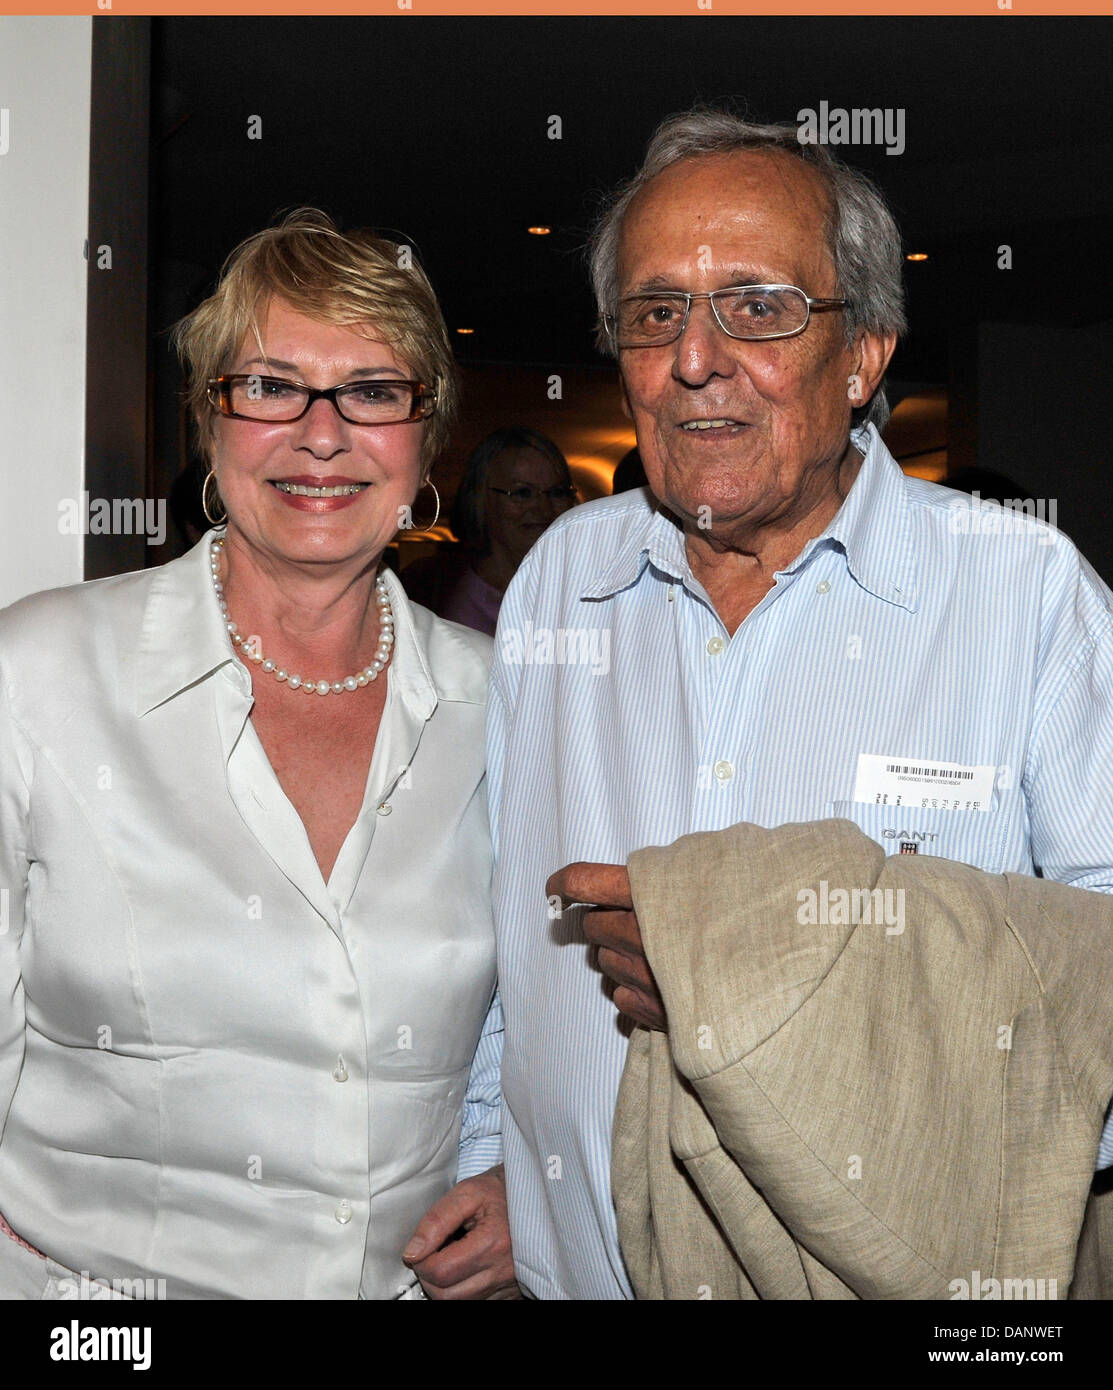 Cabaret artist, actor and author Dieter Hildebrandt and his wife Renate Kuester smile at the Residenztheater in Munich, Germany, 10 July 2011. Photo: Ursula Dueren Stock Photo